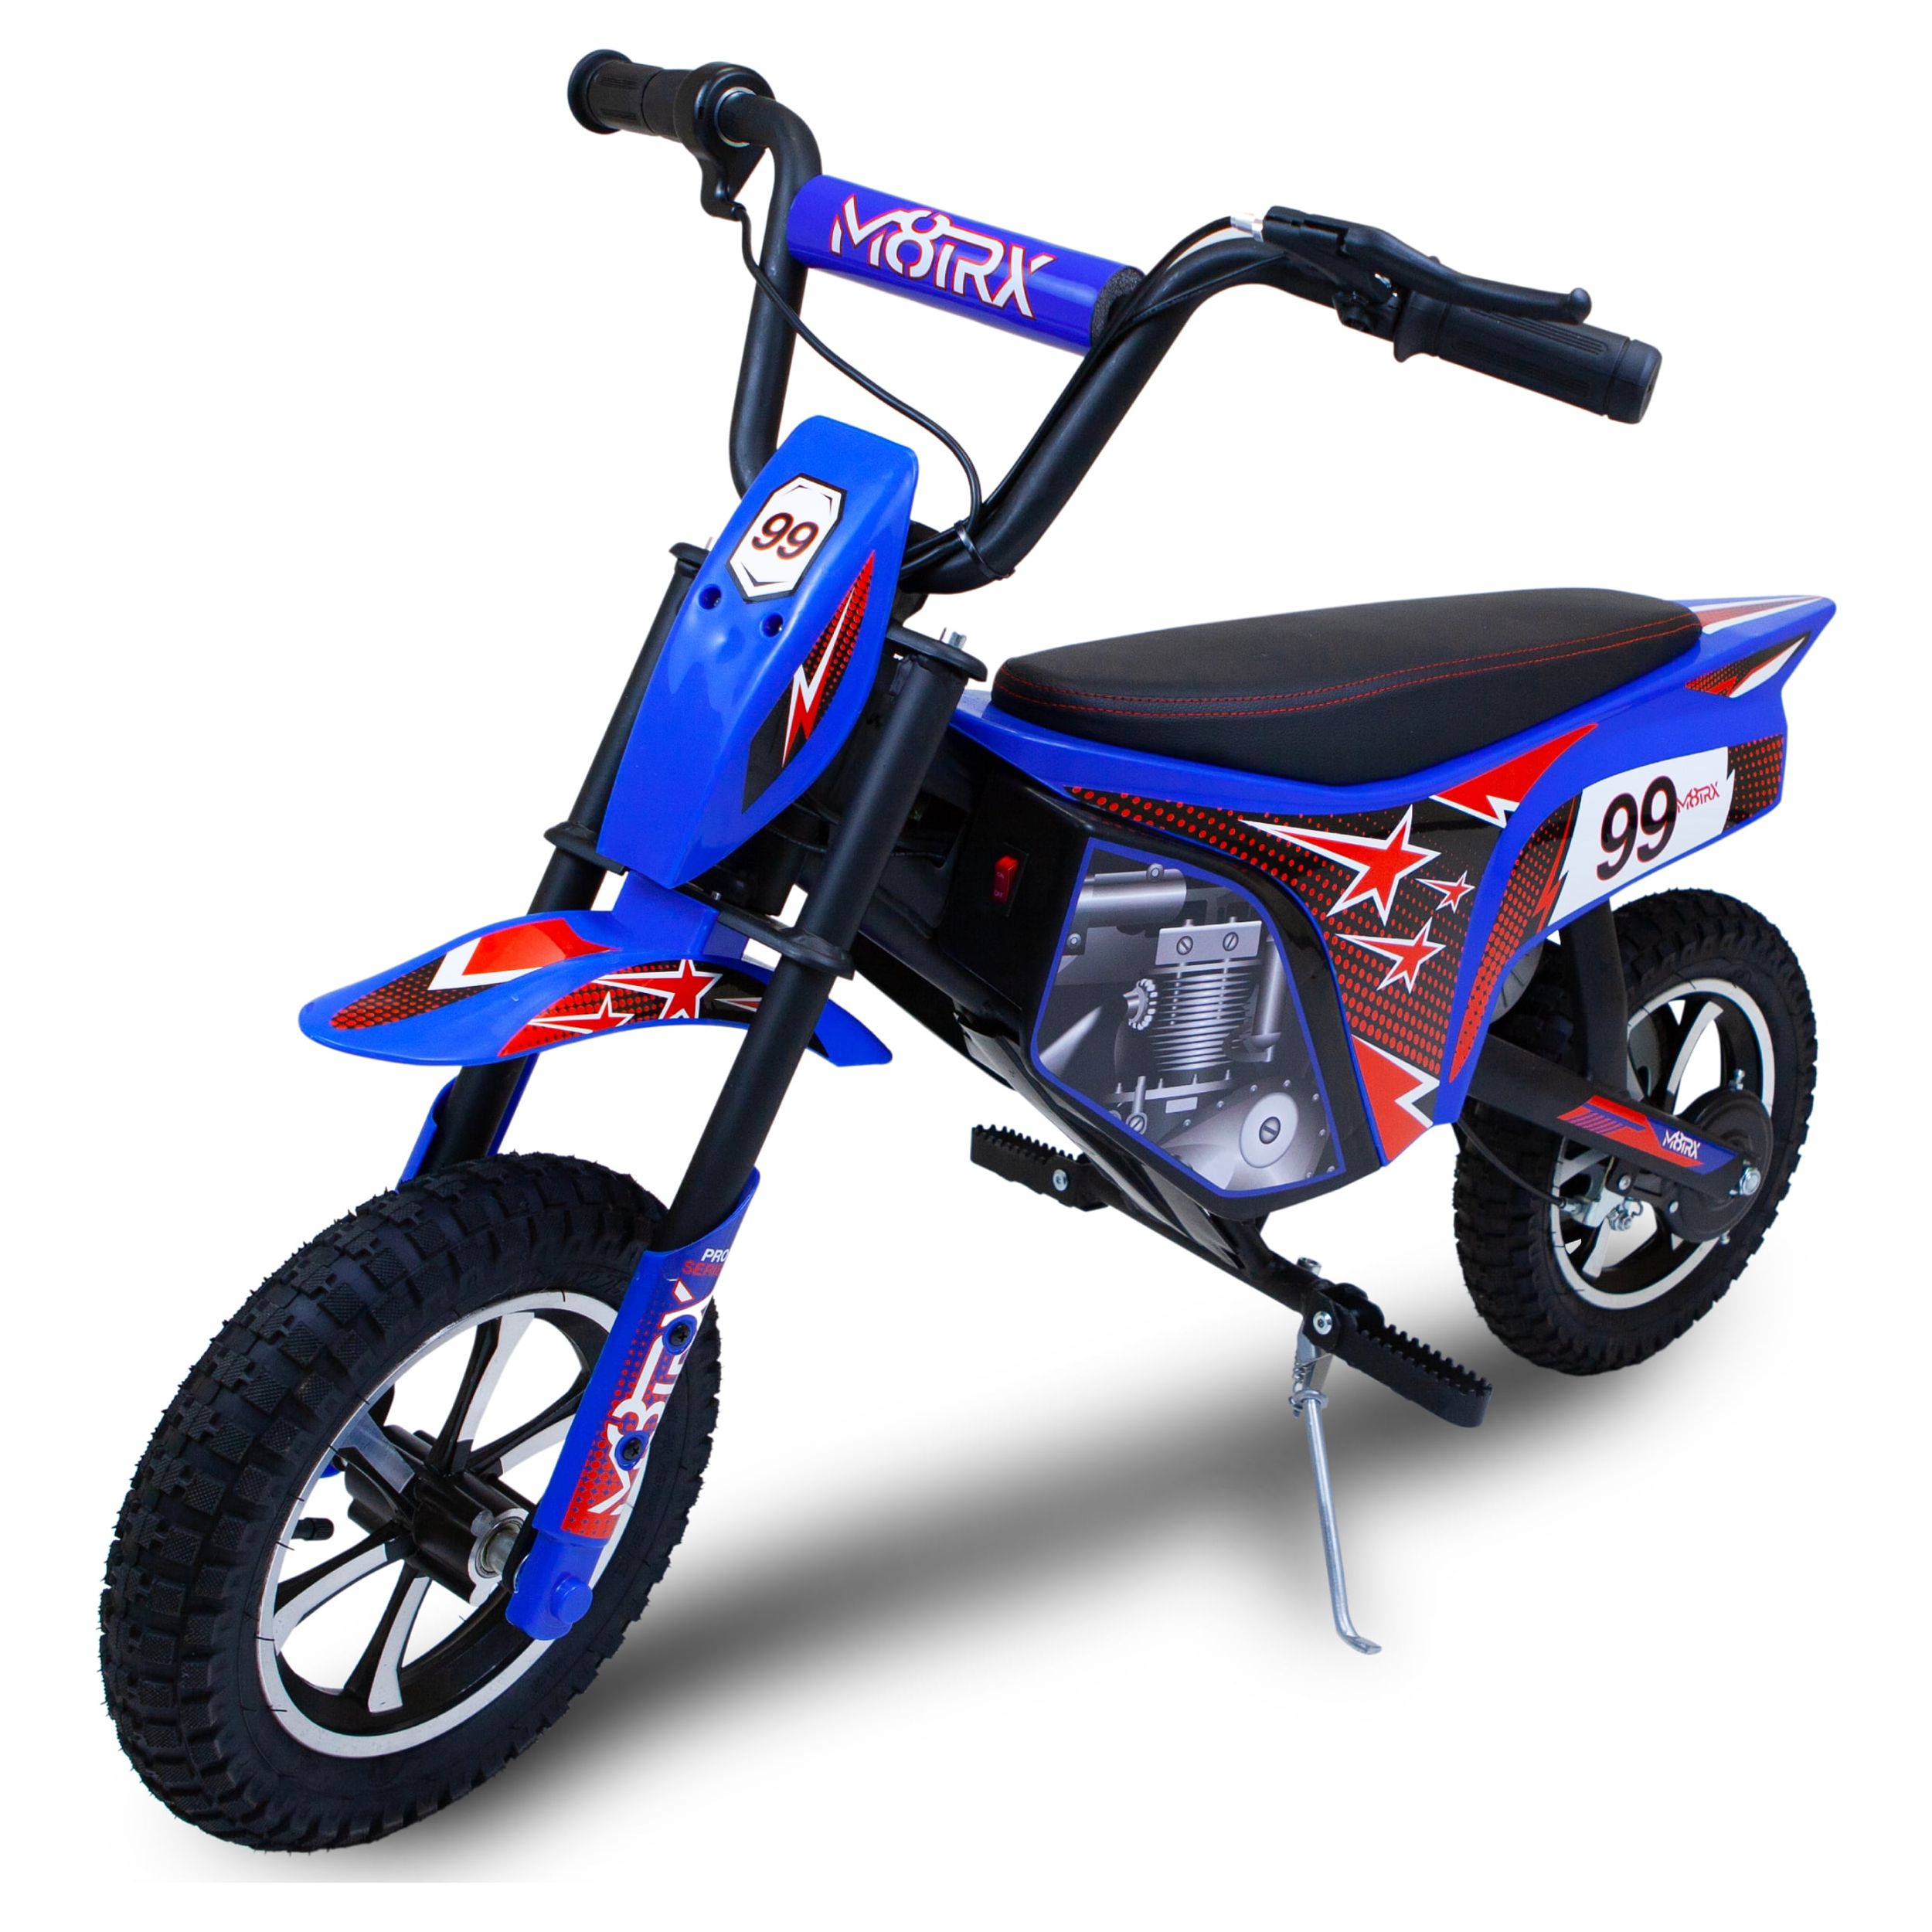 M8TRIX Blue 24V Electric Dirt Bike, Ride on Toy Motorcycle for Kids and Teens - image 1 of 8